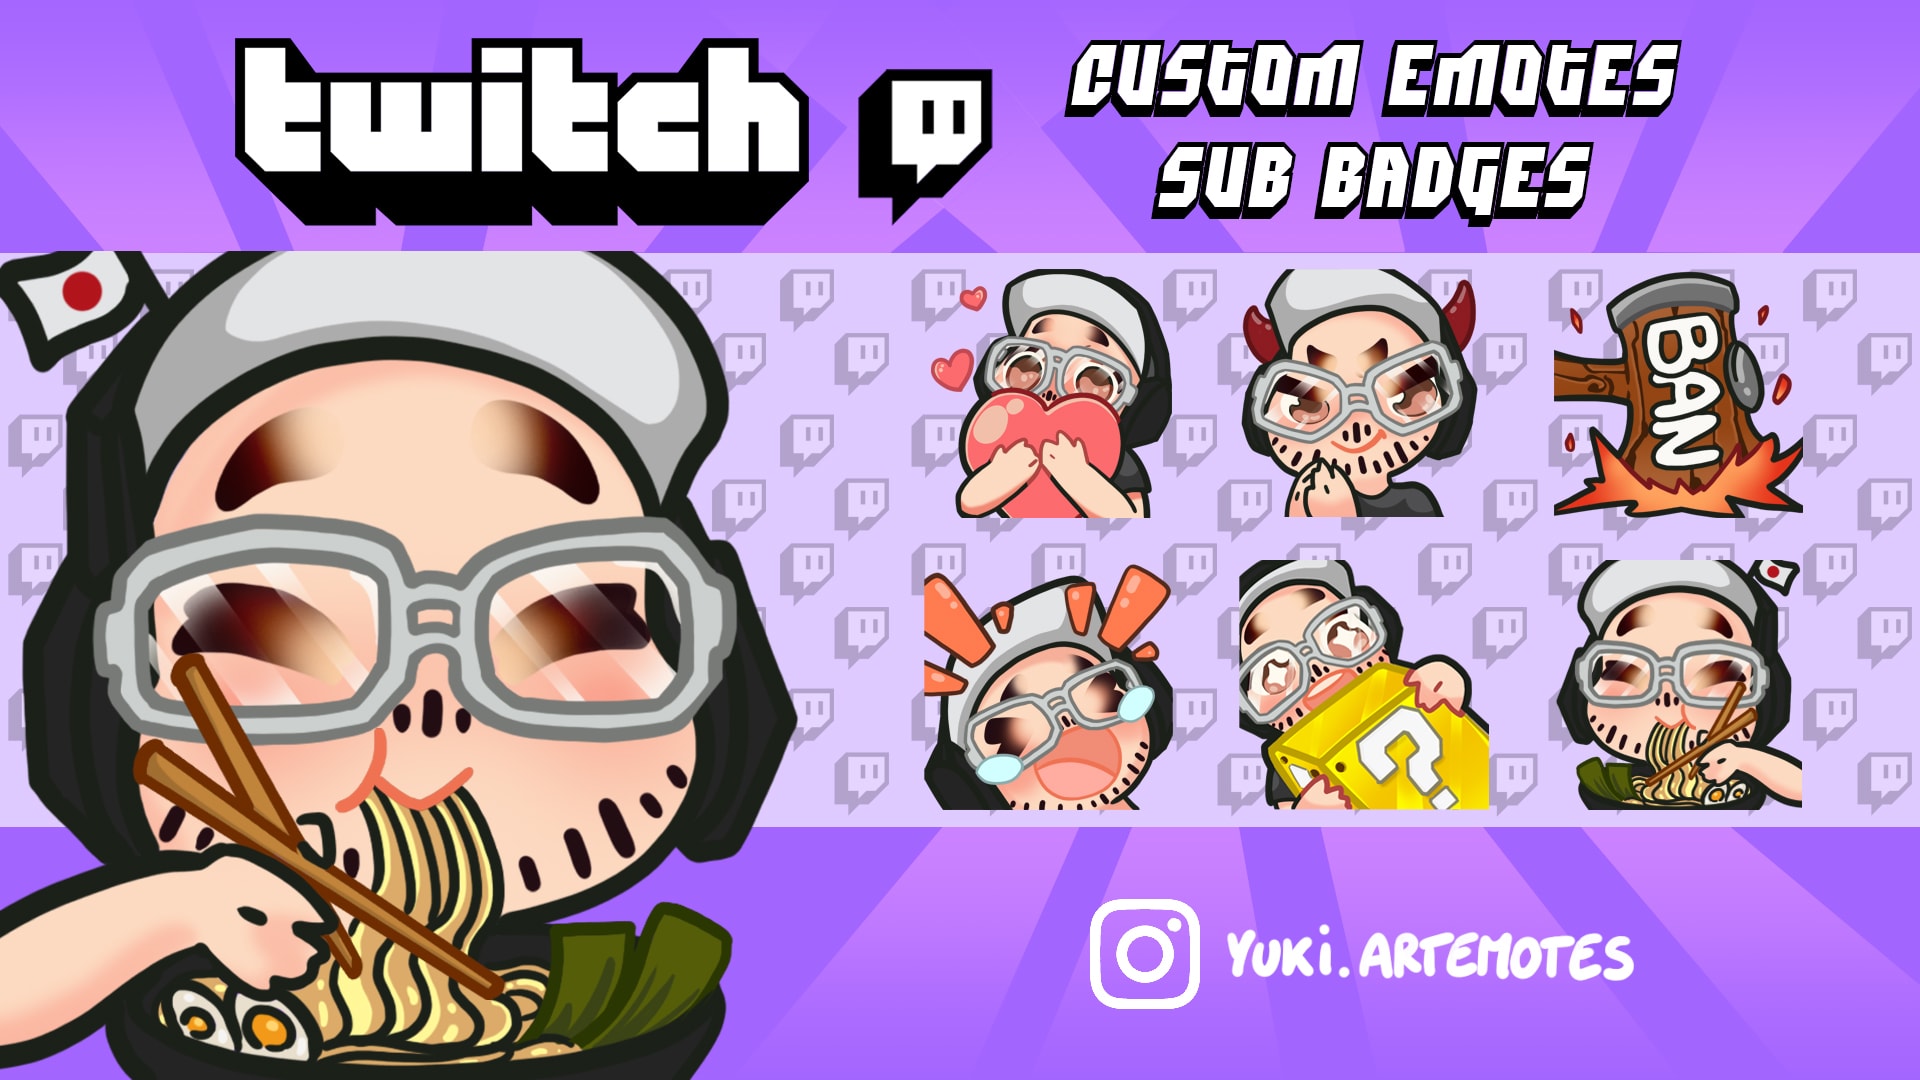 How to Make Cute Anime Twitch Panels | Envato Tuts+